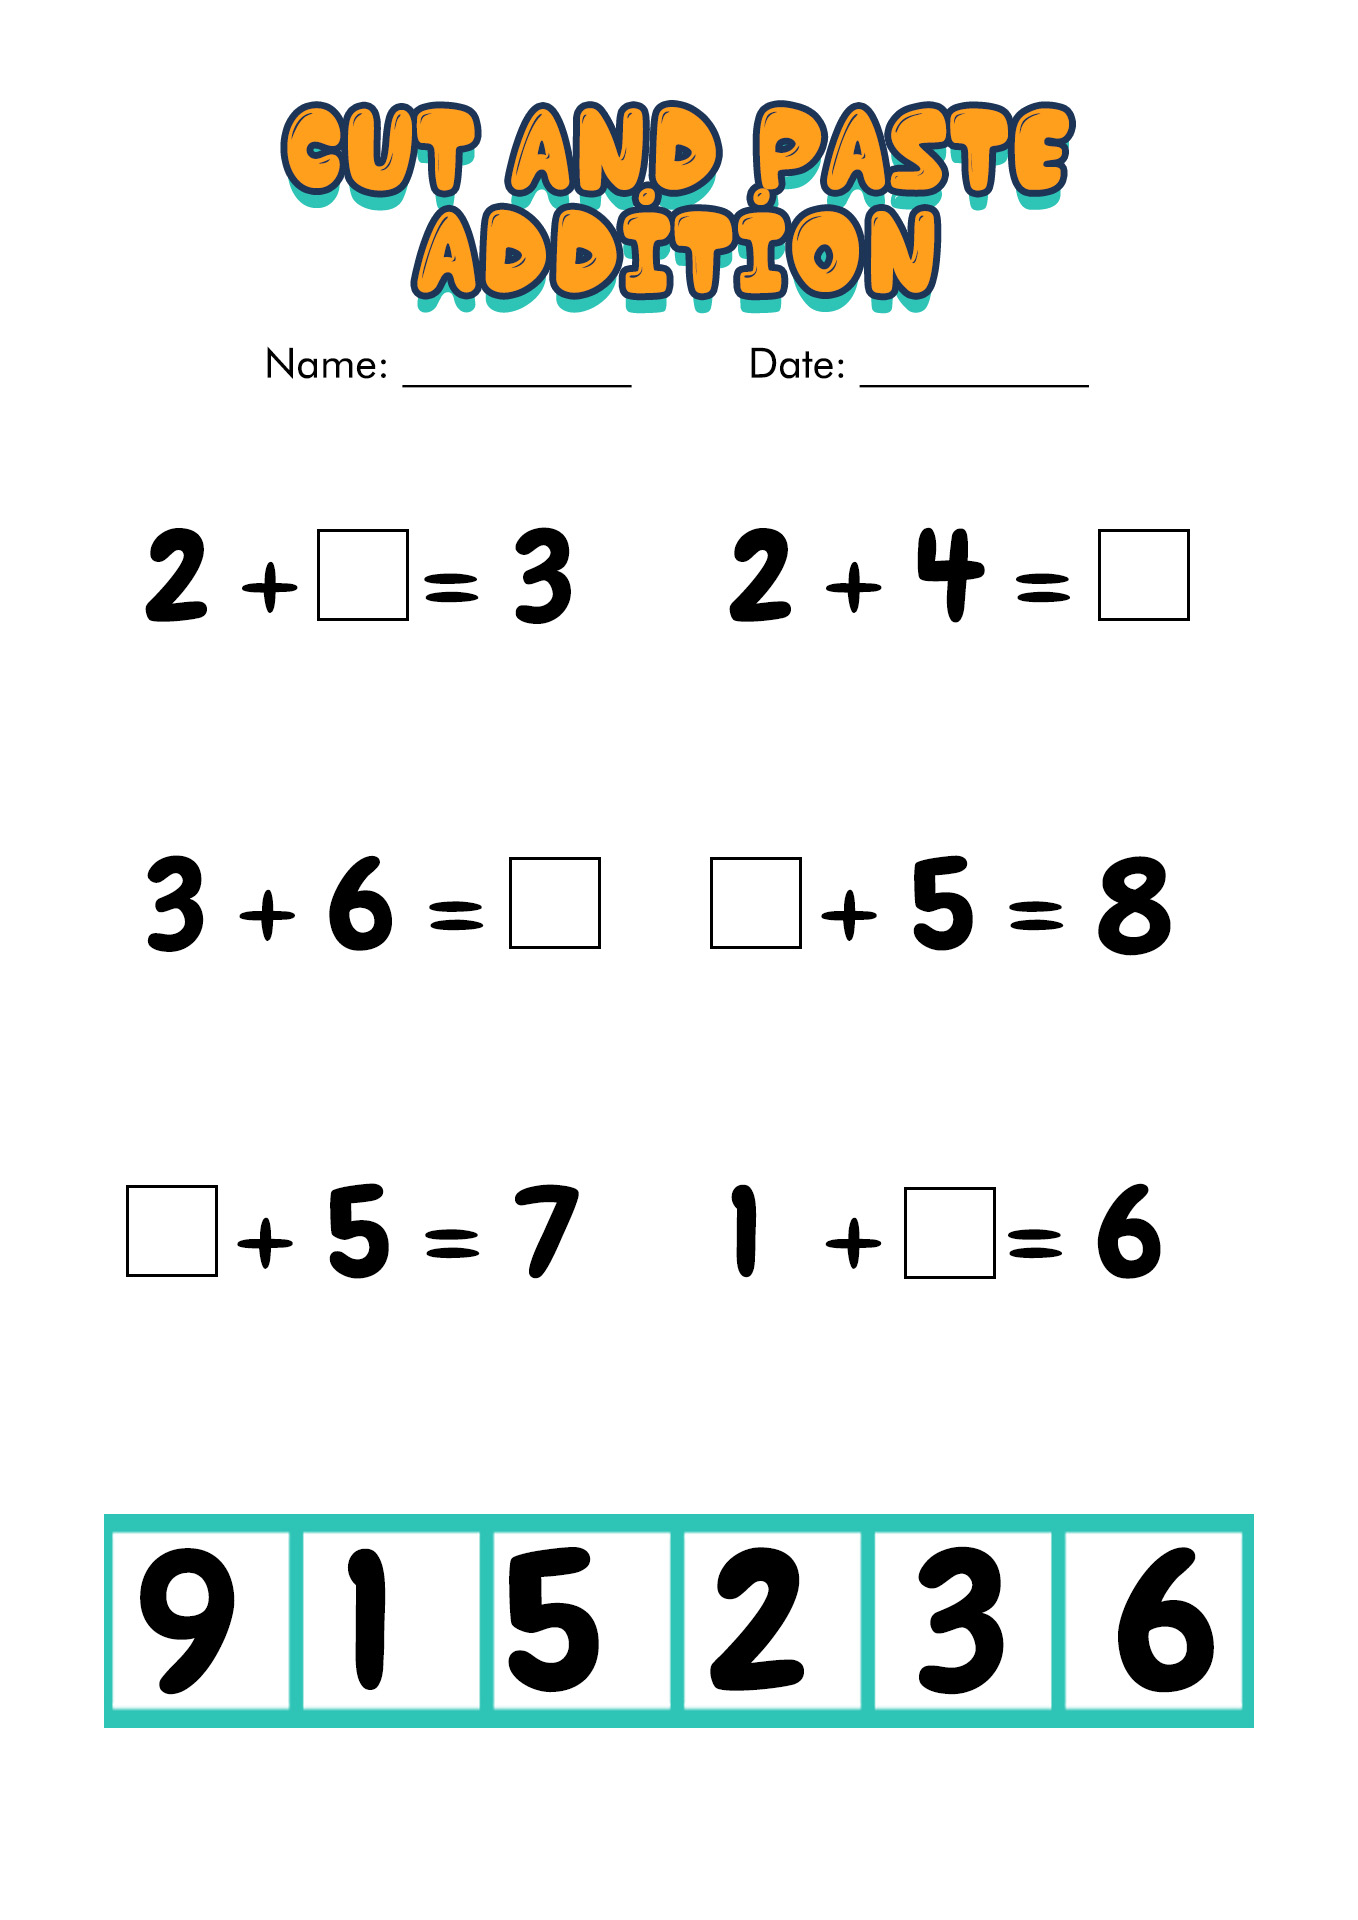 Cut and Paste Math Addition Image